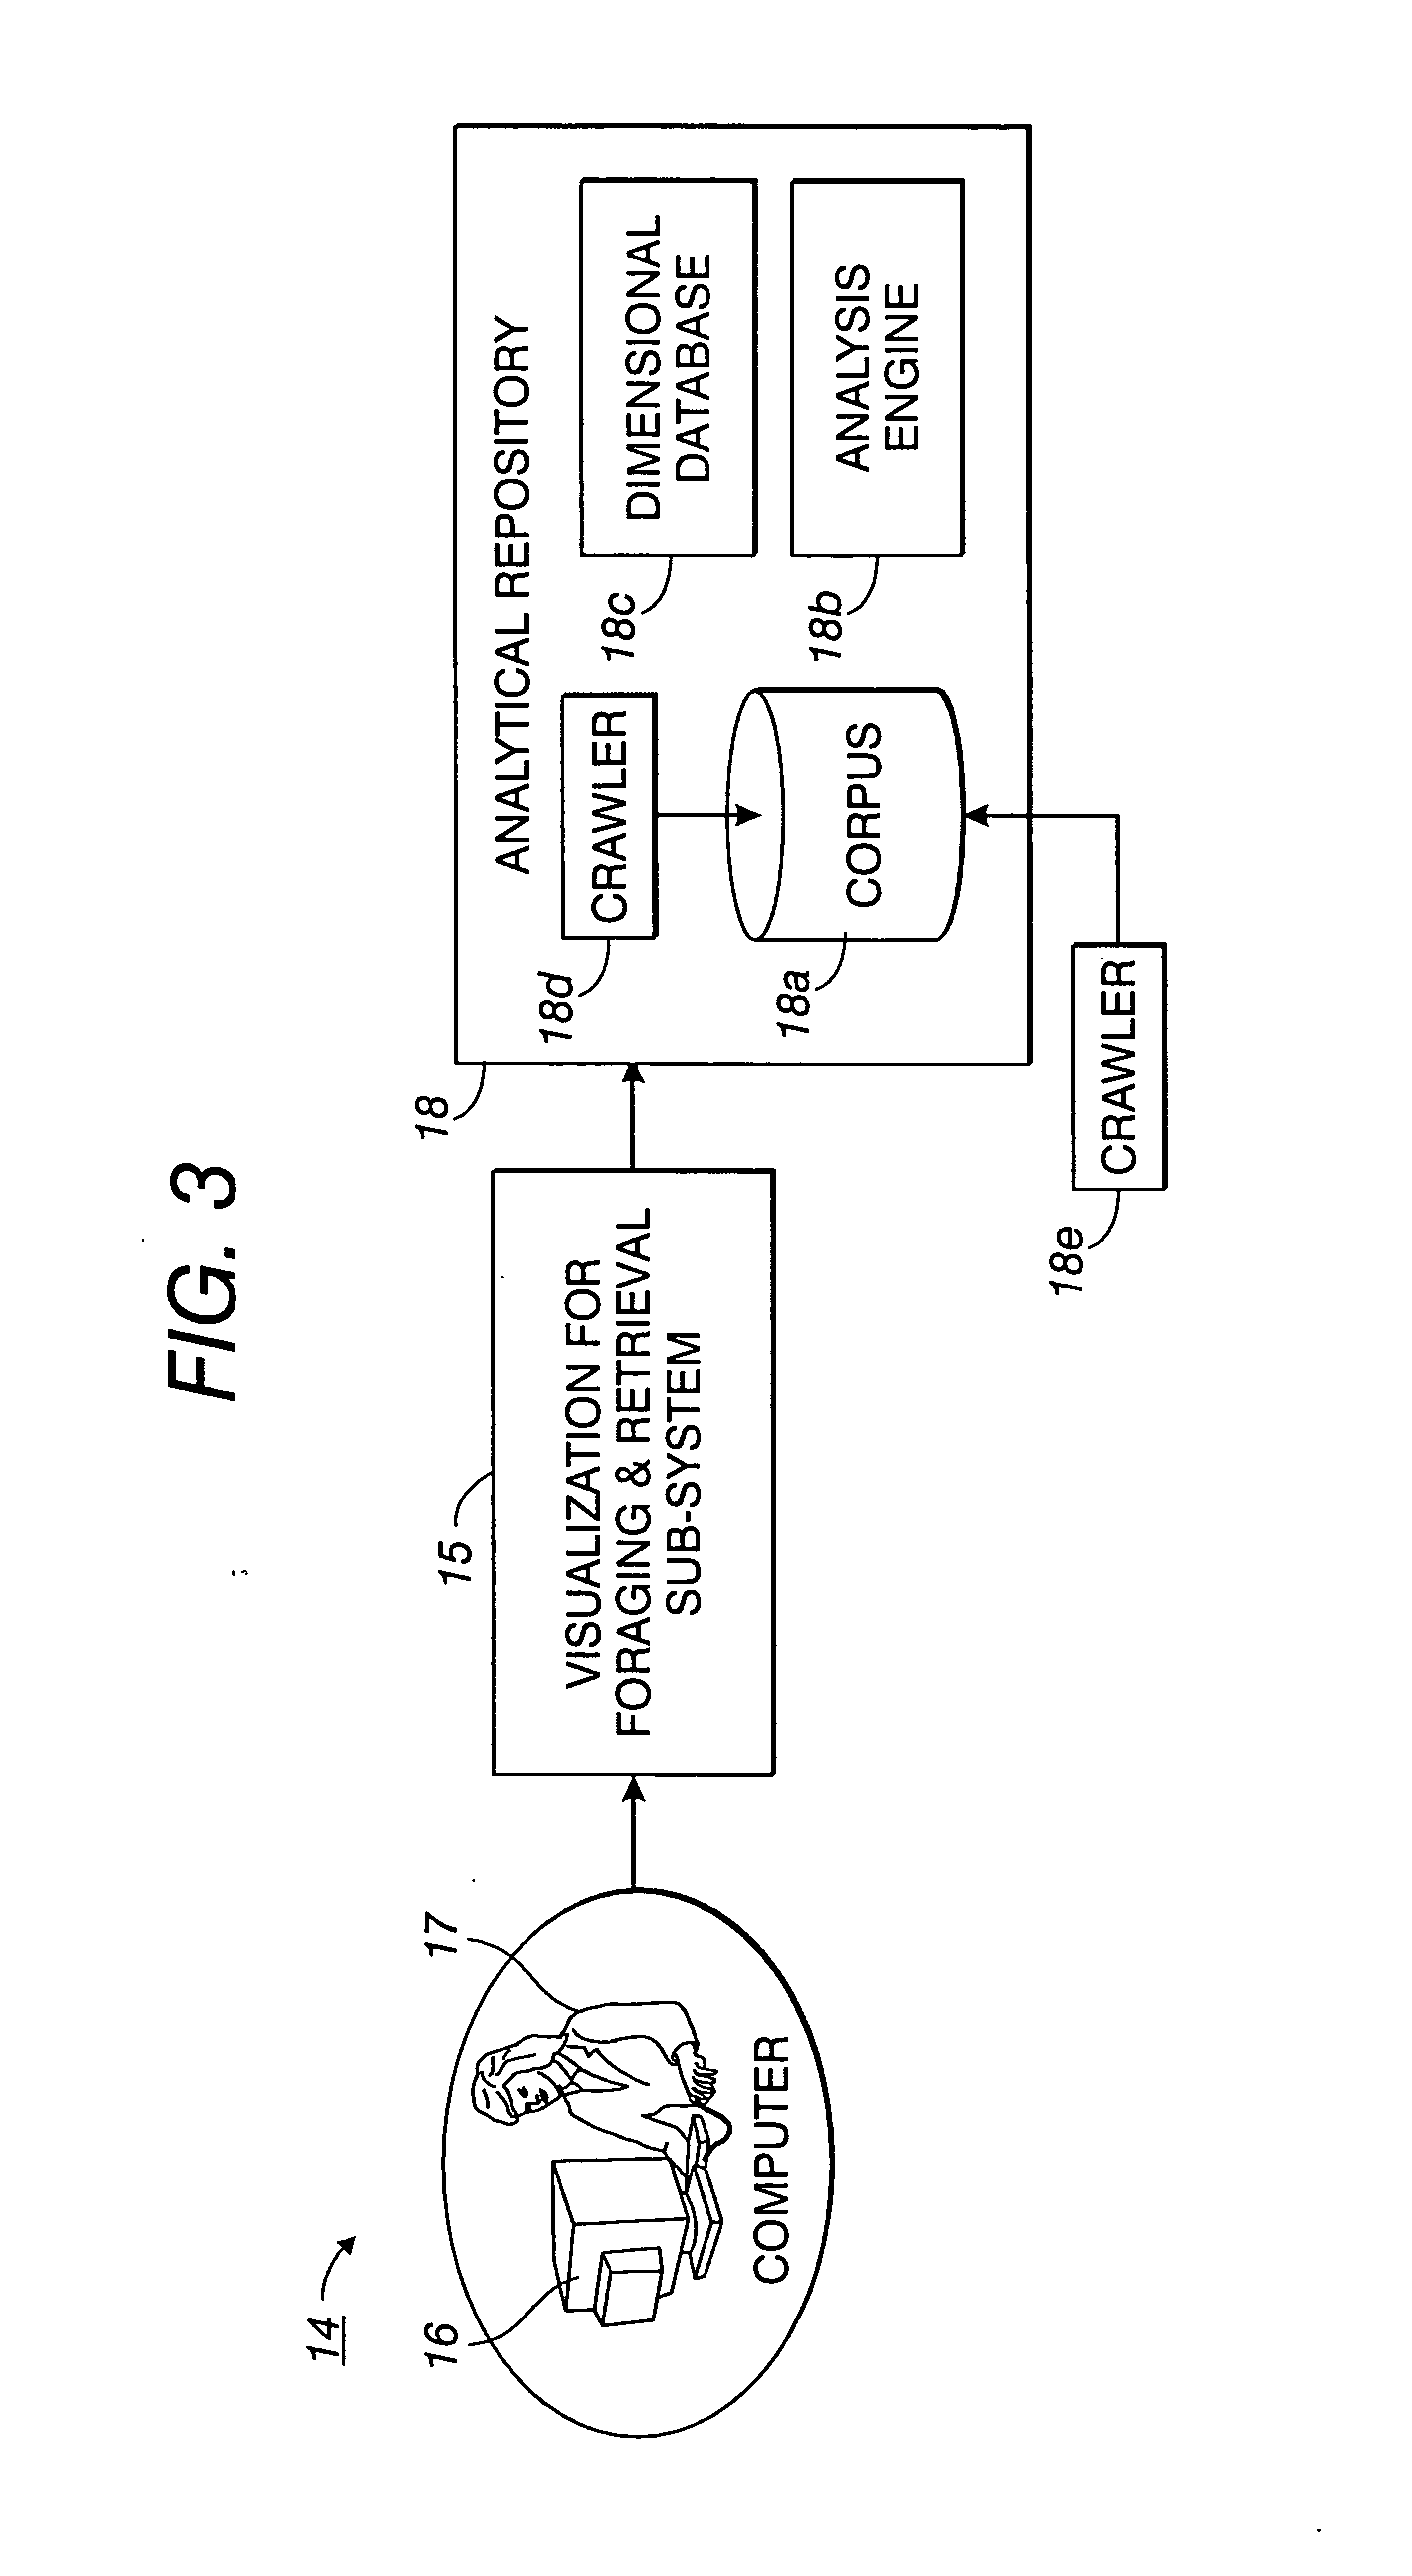 System and method for multi-dimensional foraging and retrieval of documents